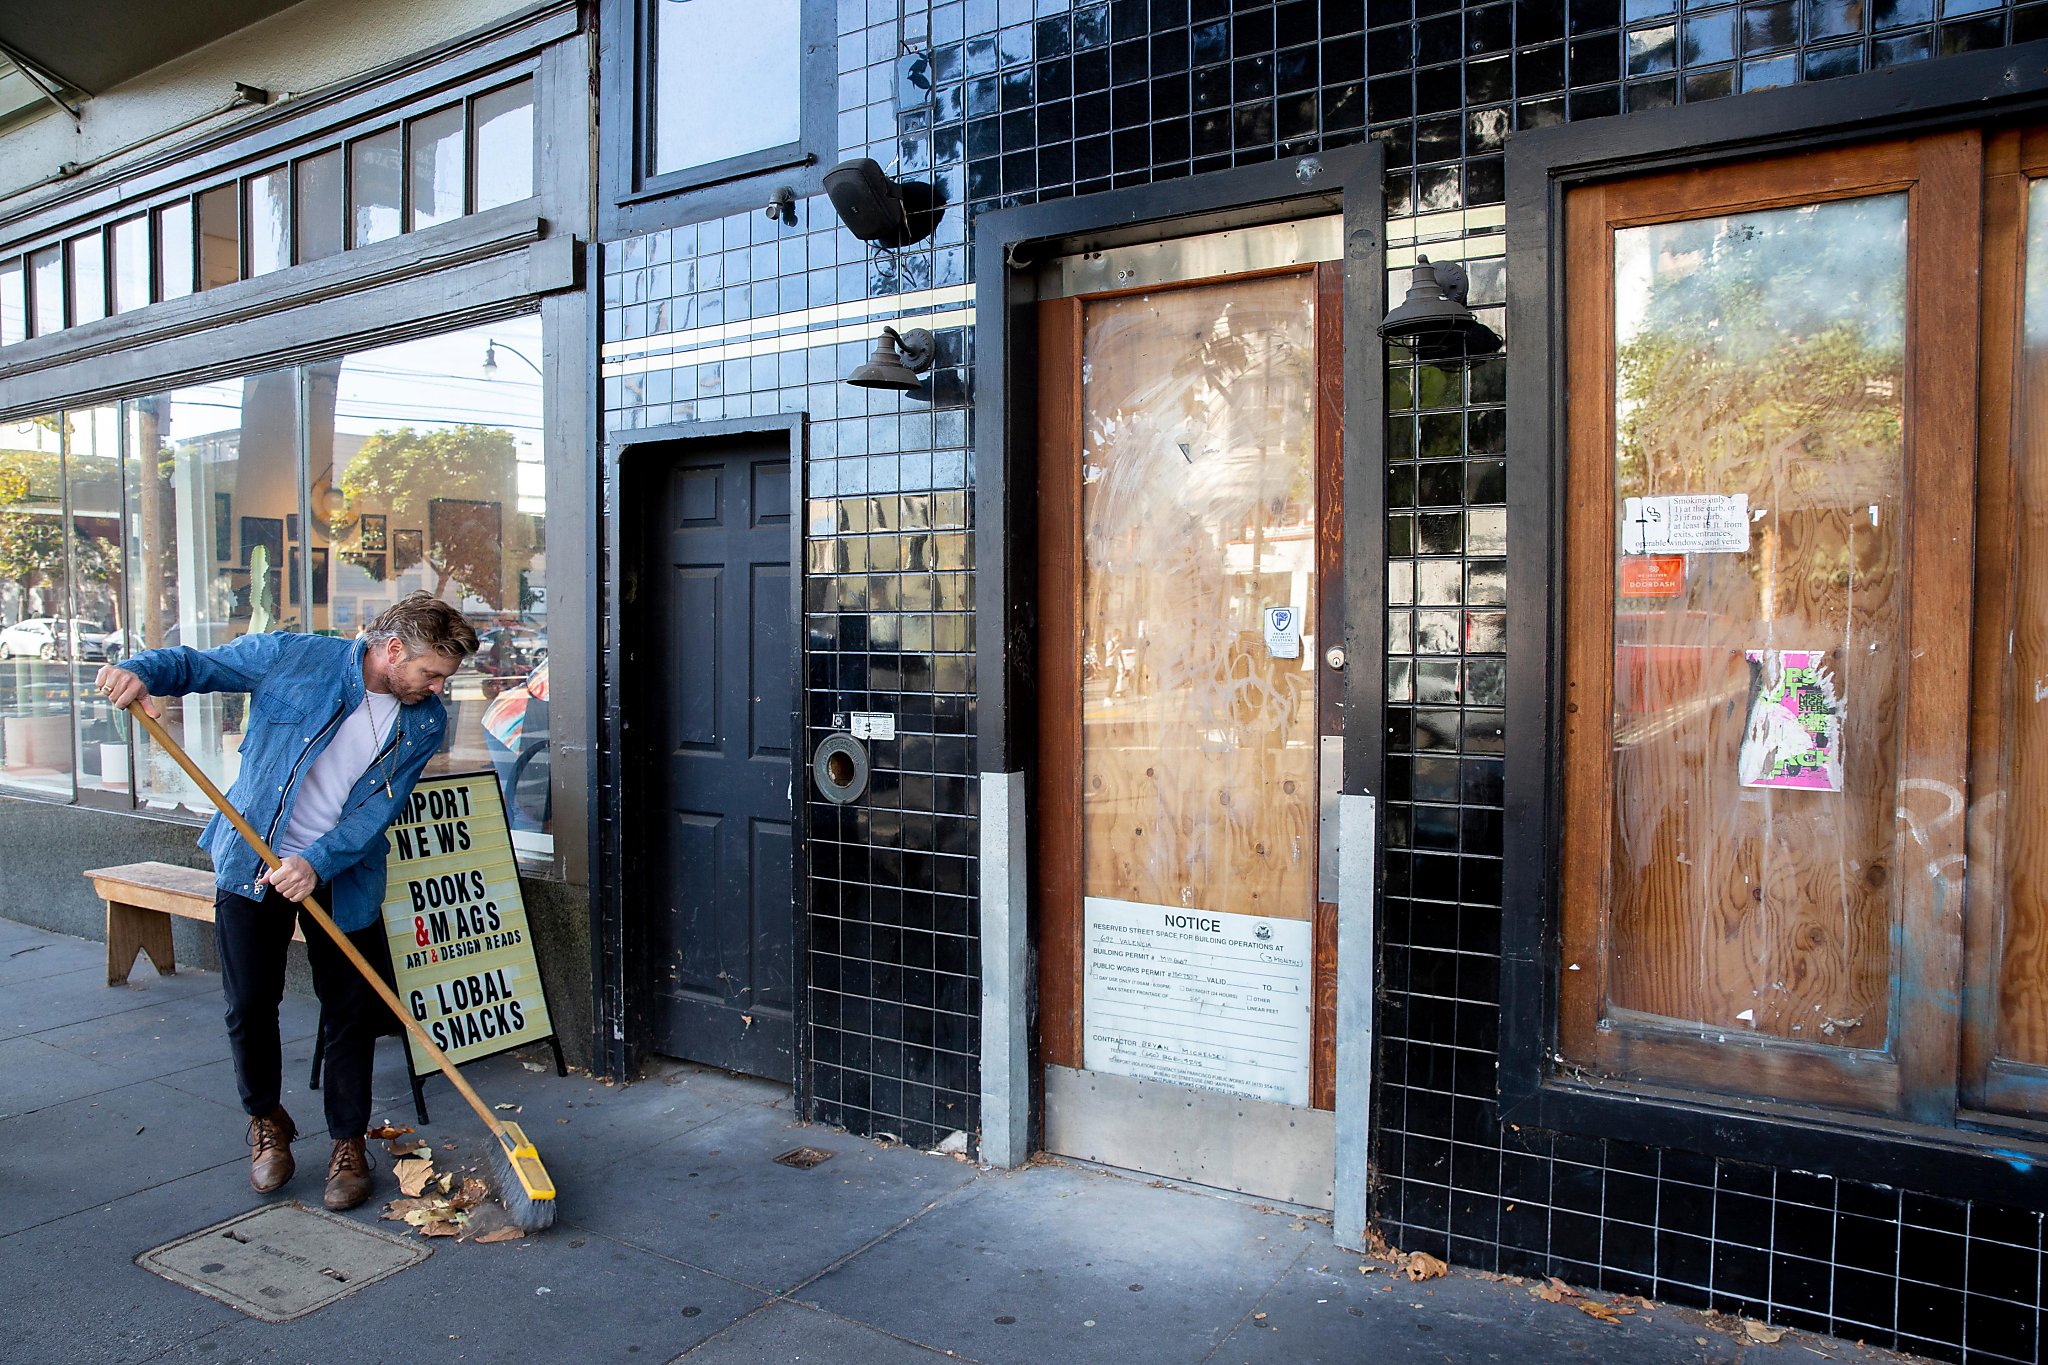 sf-vacancy-tax-to-fight-empty-storefronts-headed-to-march-ballot